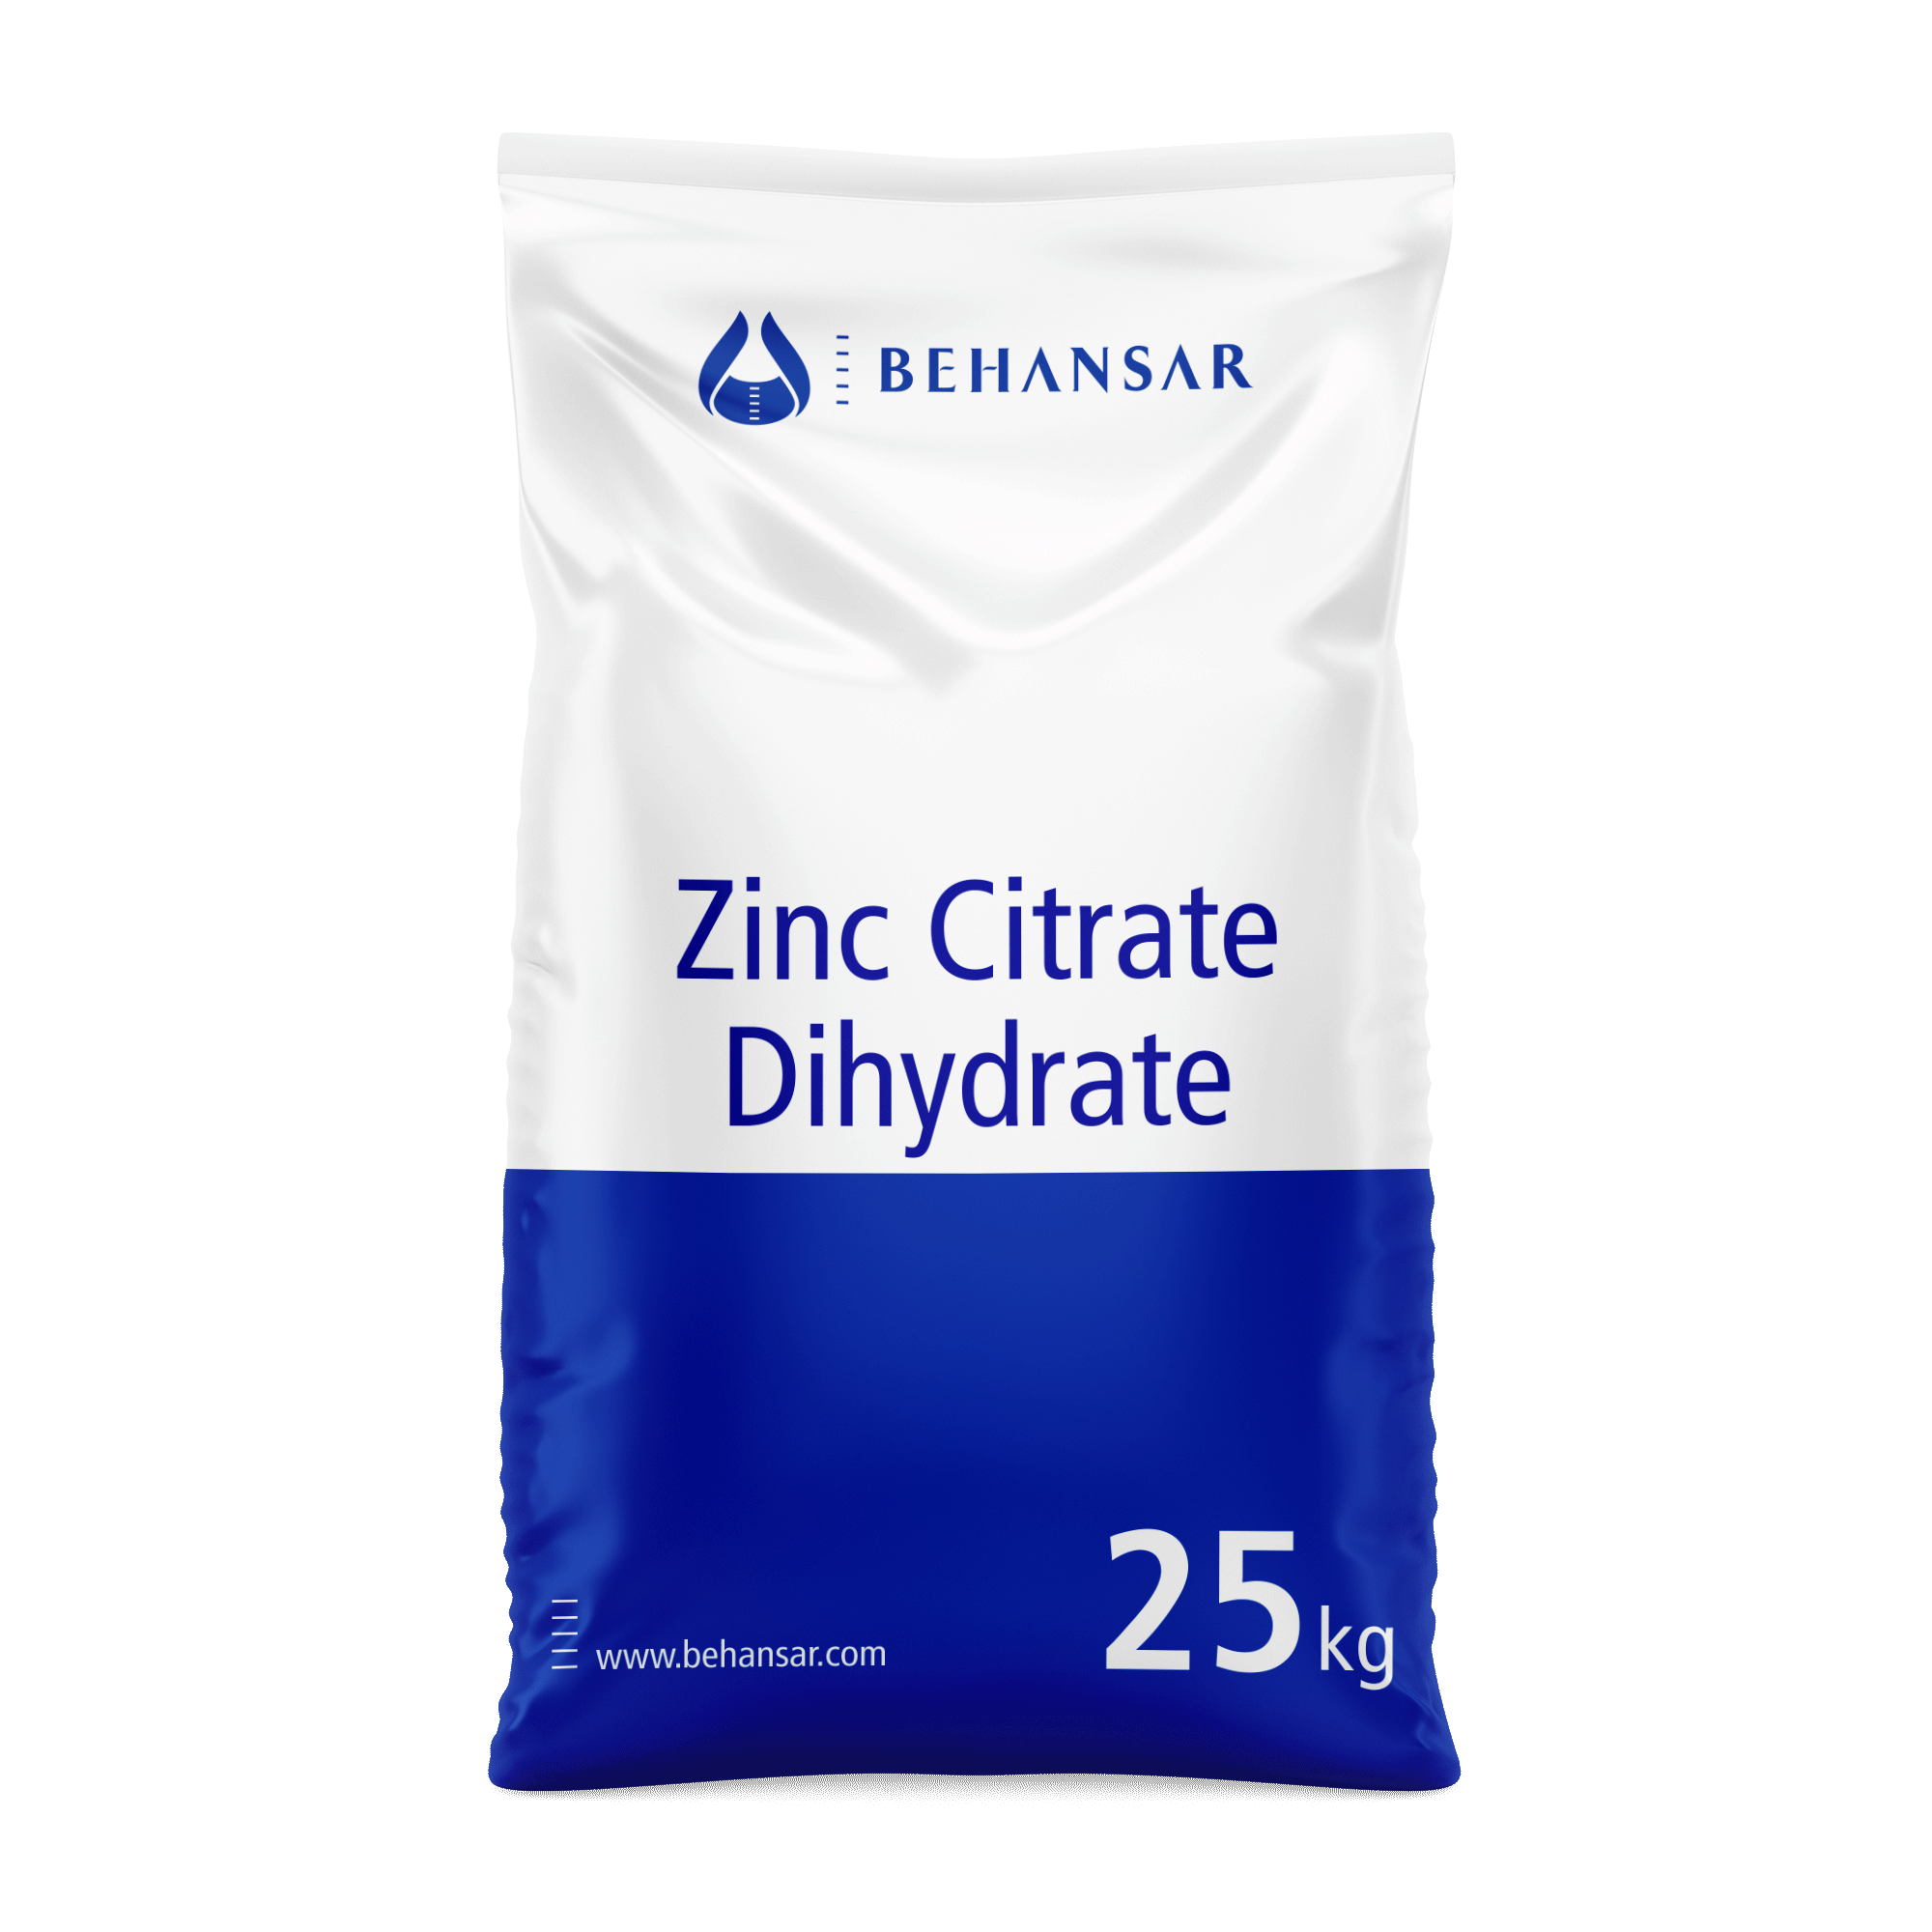 Zinc Citrate Dihydrate is one of the products of Behansar Co